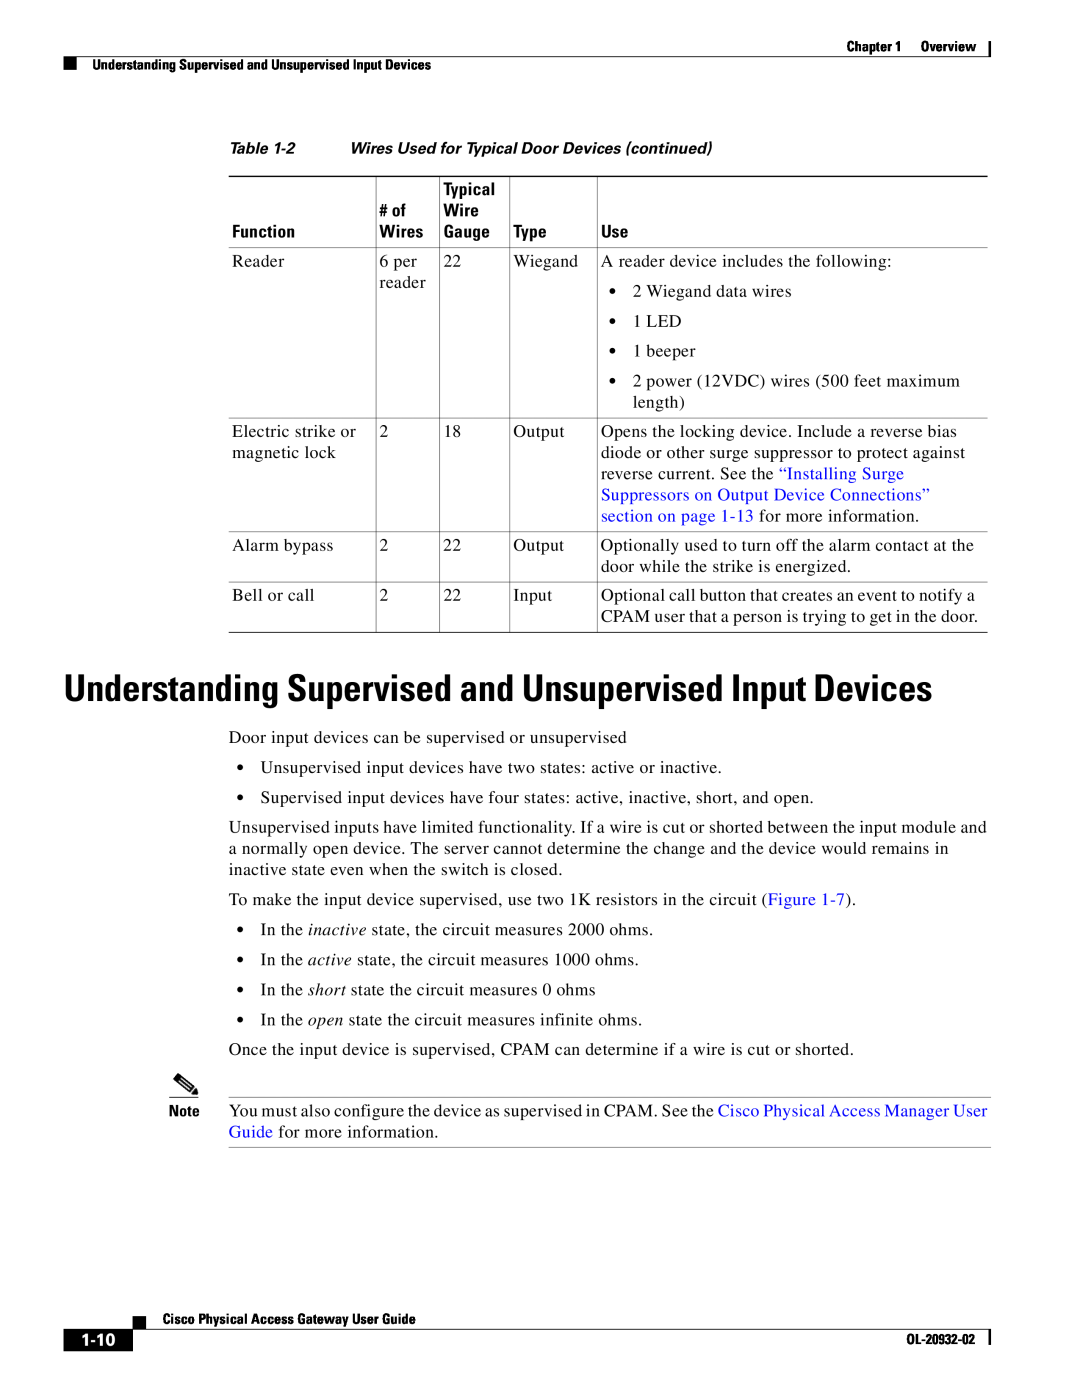 Cisco Systems OL-20932-02 manual Understanding Supervised and Unsupervised Input Devices, 1-10 